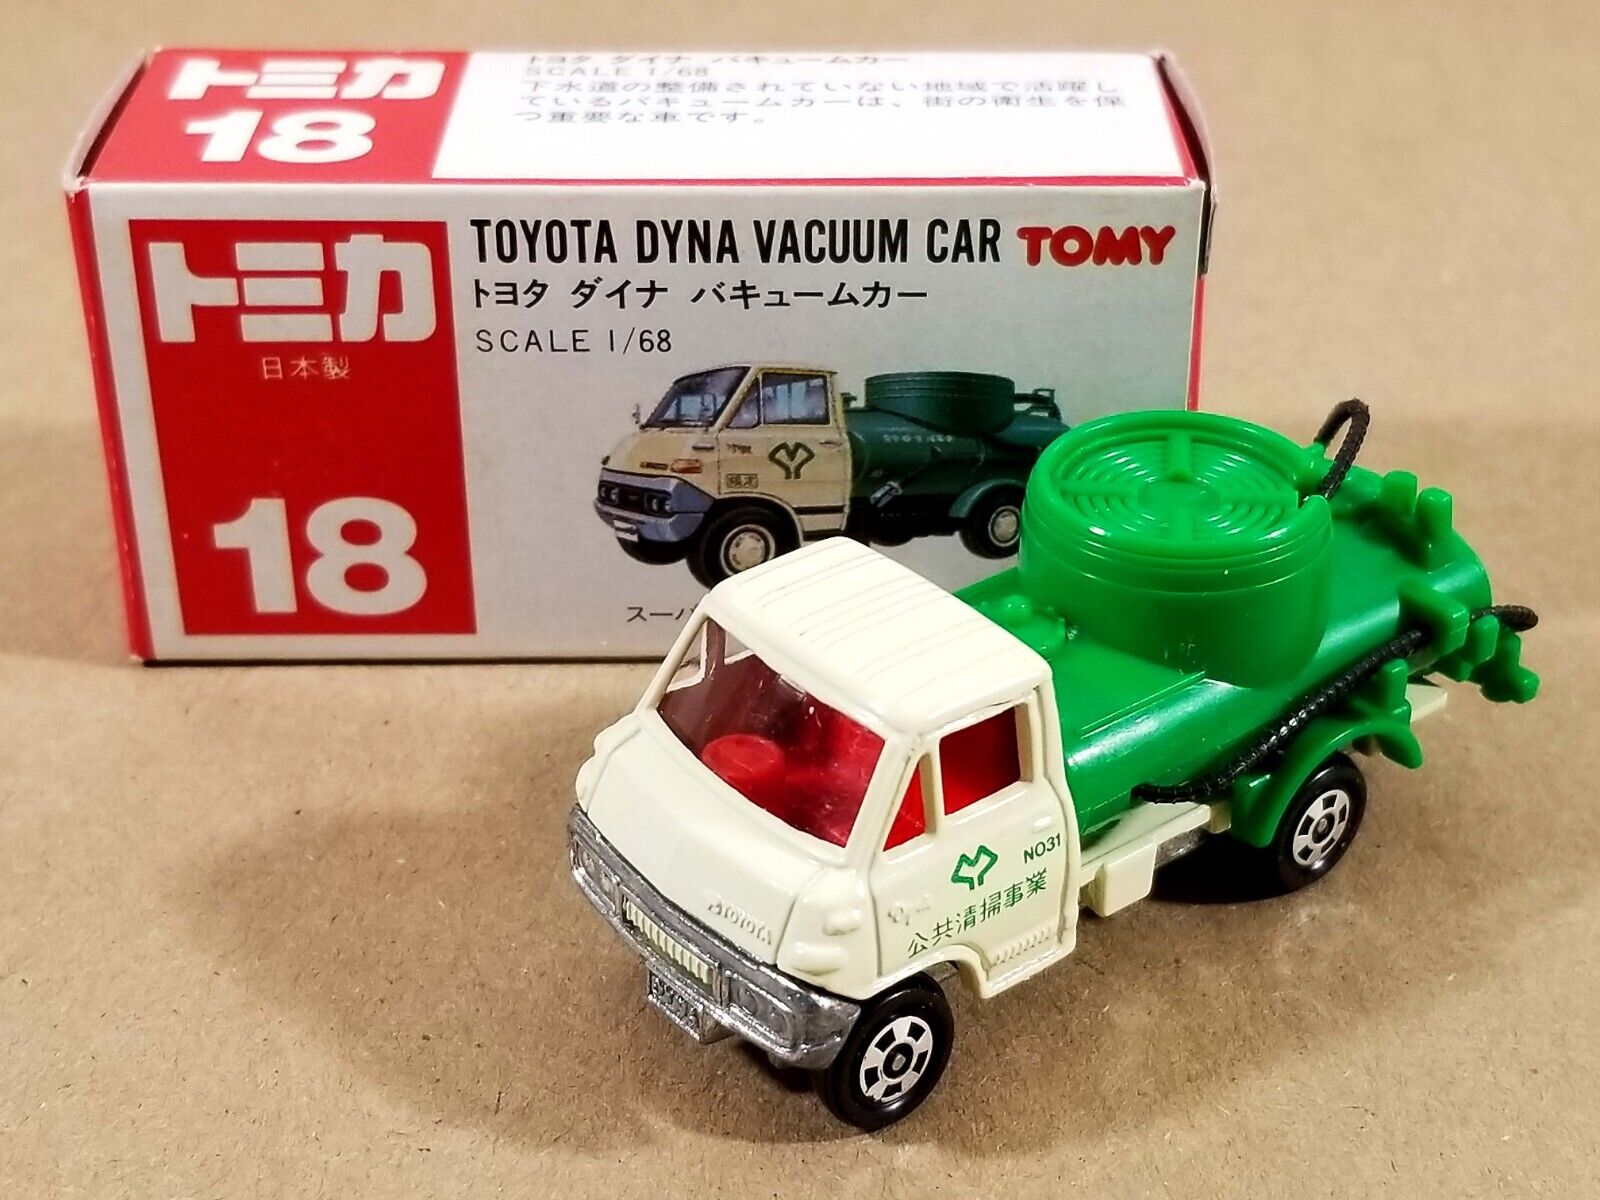 TOMY Tomica Toyota Dyna Vacuum Car / #18 / Made in Japan